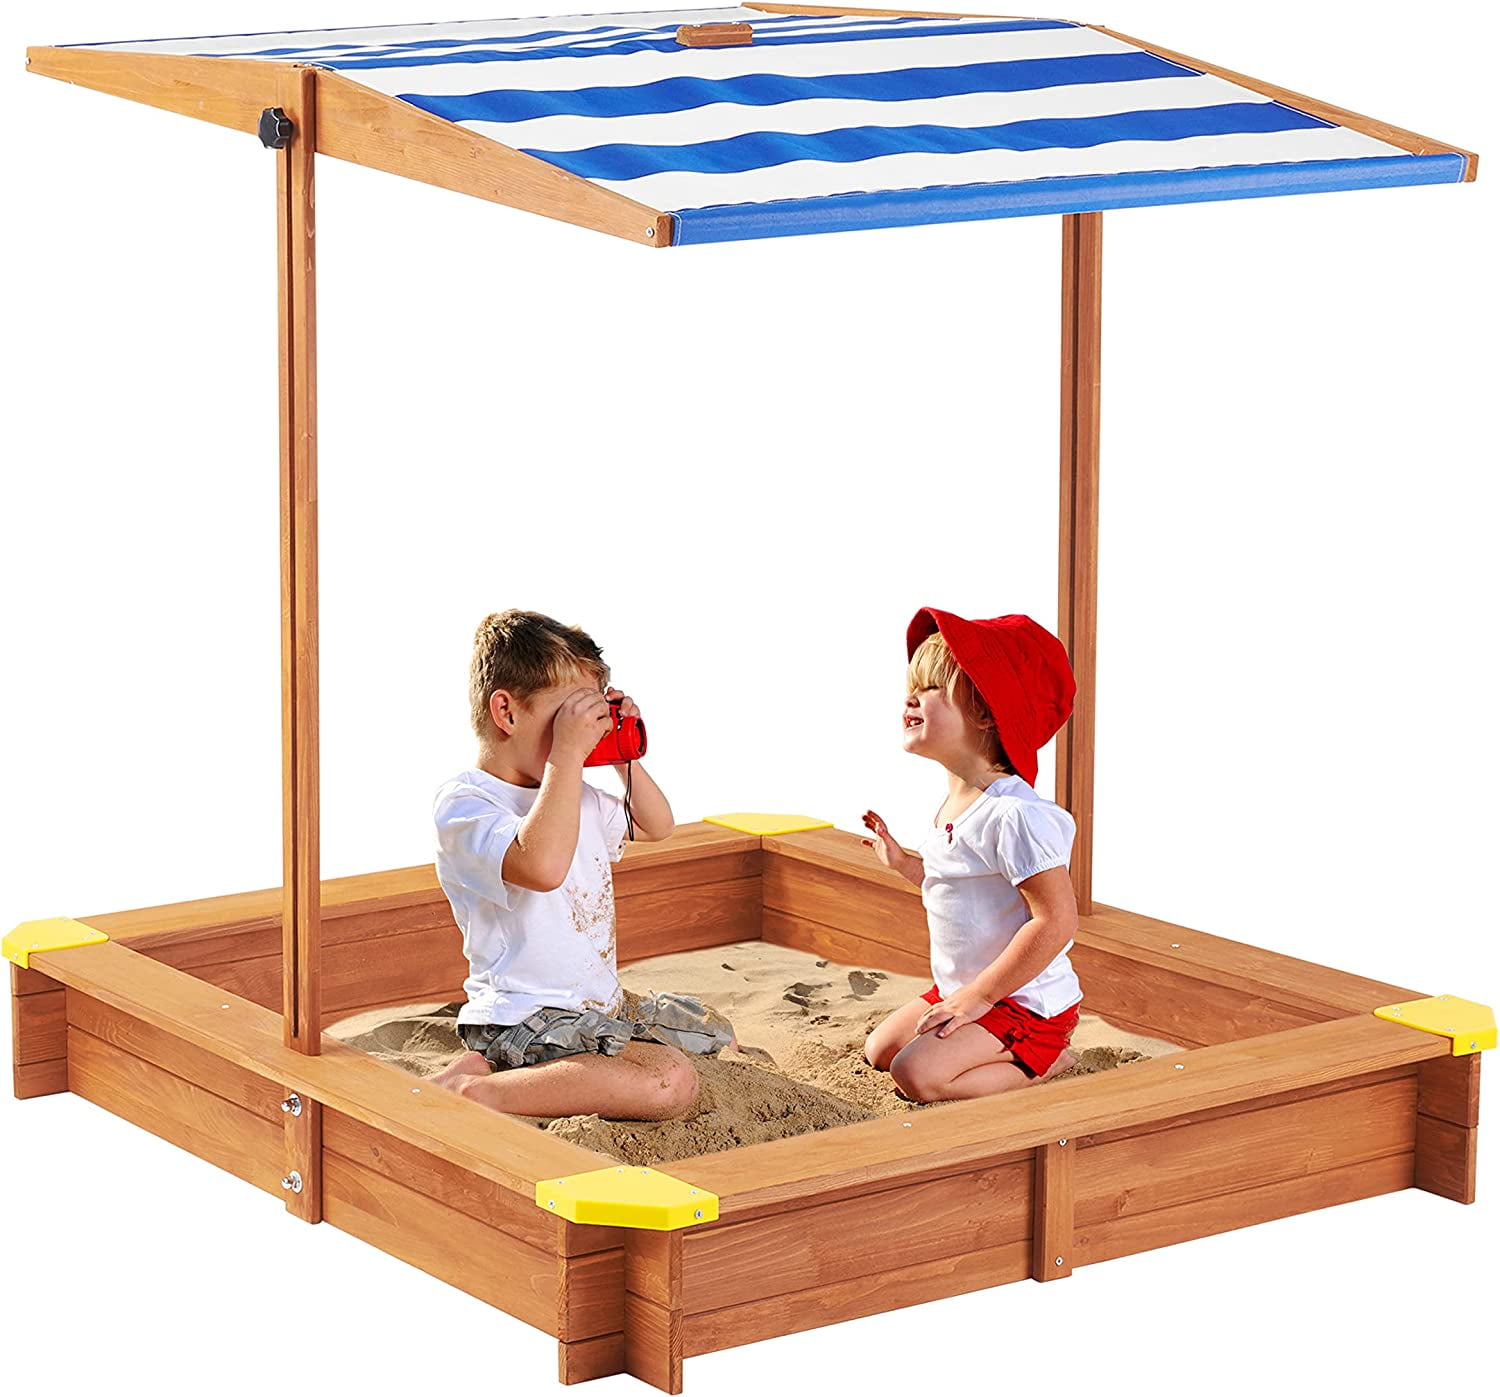 Canadian Cedar Wood Sandpit w/ Adjustable Canopy for Outdoor Backyard Play Kid's Sandbox with Cover 